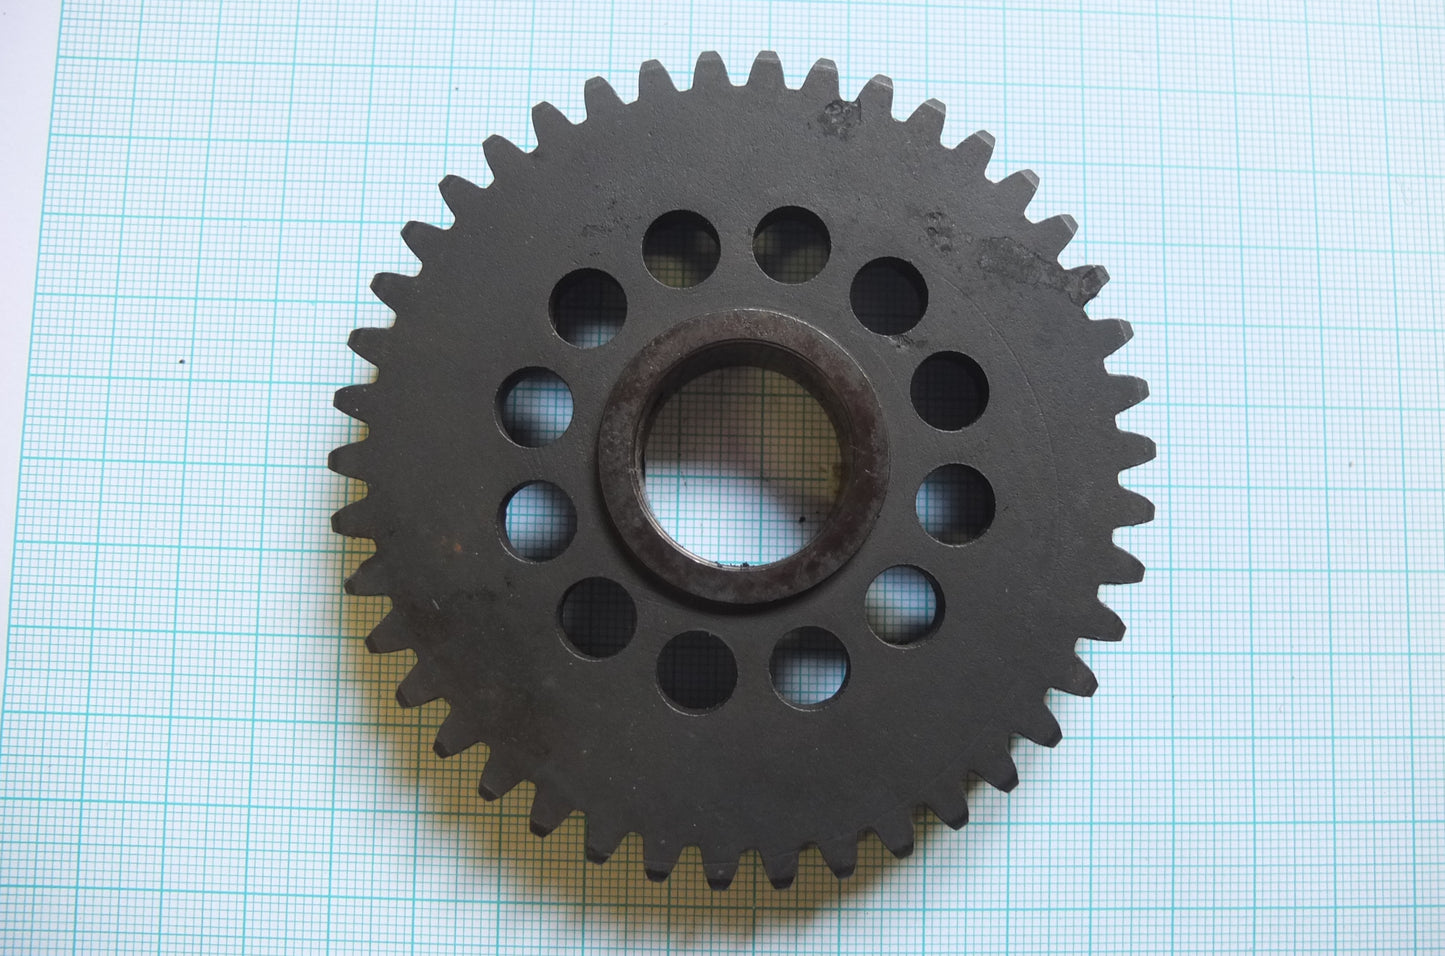 P2/098 Layshaft 3rd Speed Gear - please ask